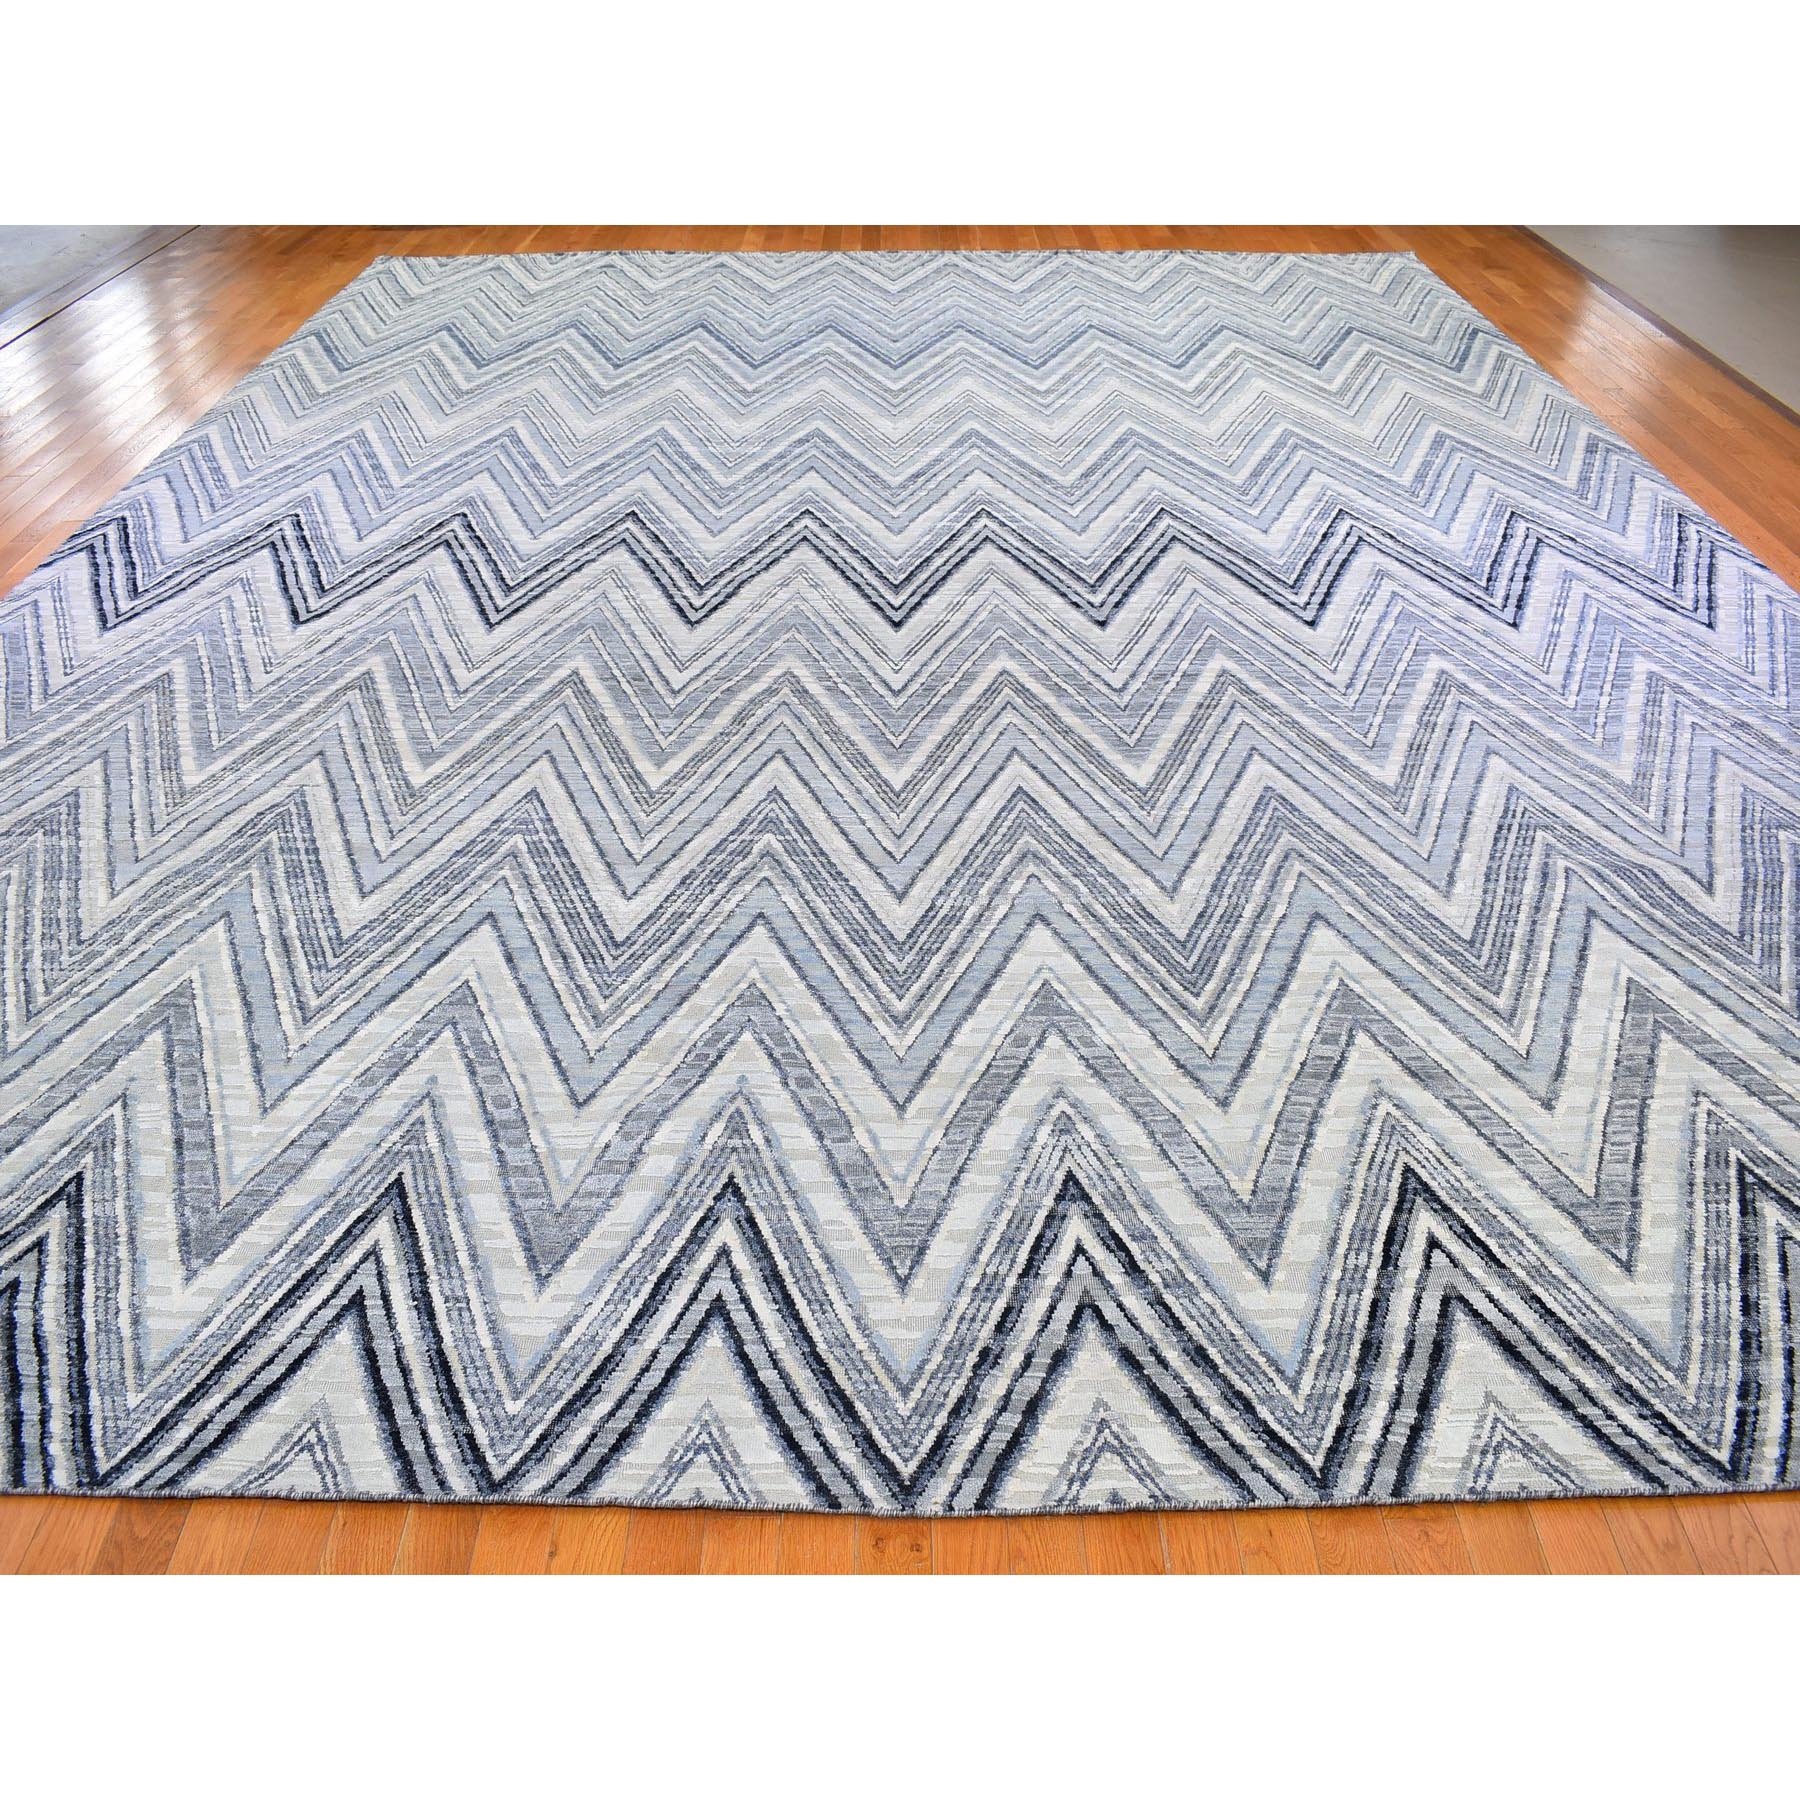 14'1"x18'1" Oversized Gray-Blue Chevron Design Textured Wool and Pure Silk Hand Woven Oriental Rug 